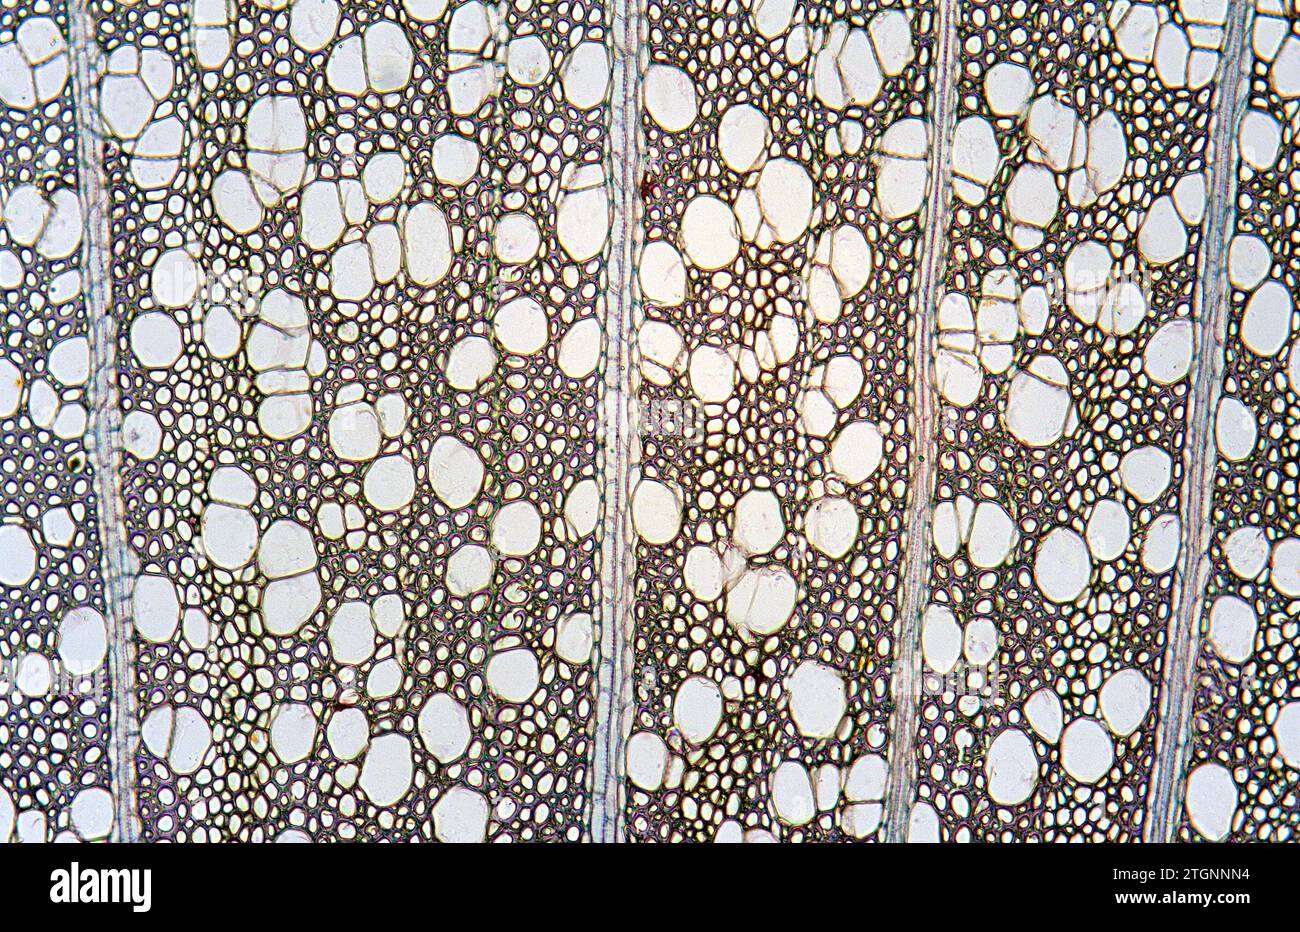 Stem cross section showing secundary xylem and radial parenchima. Photomicrograph. Stock Photo